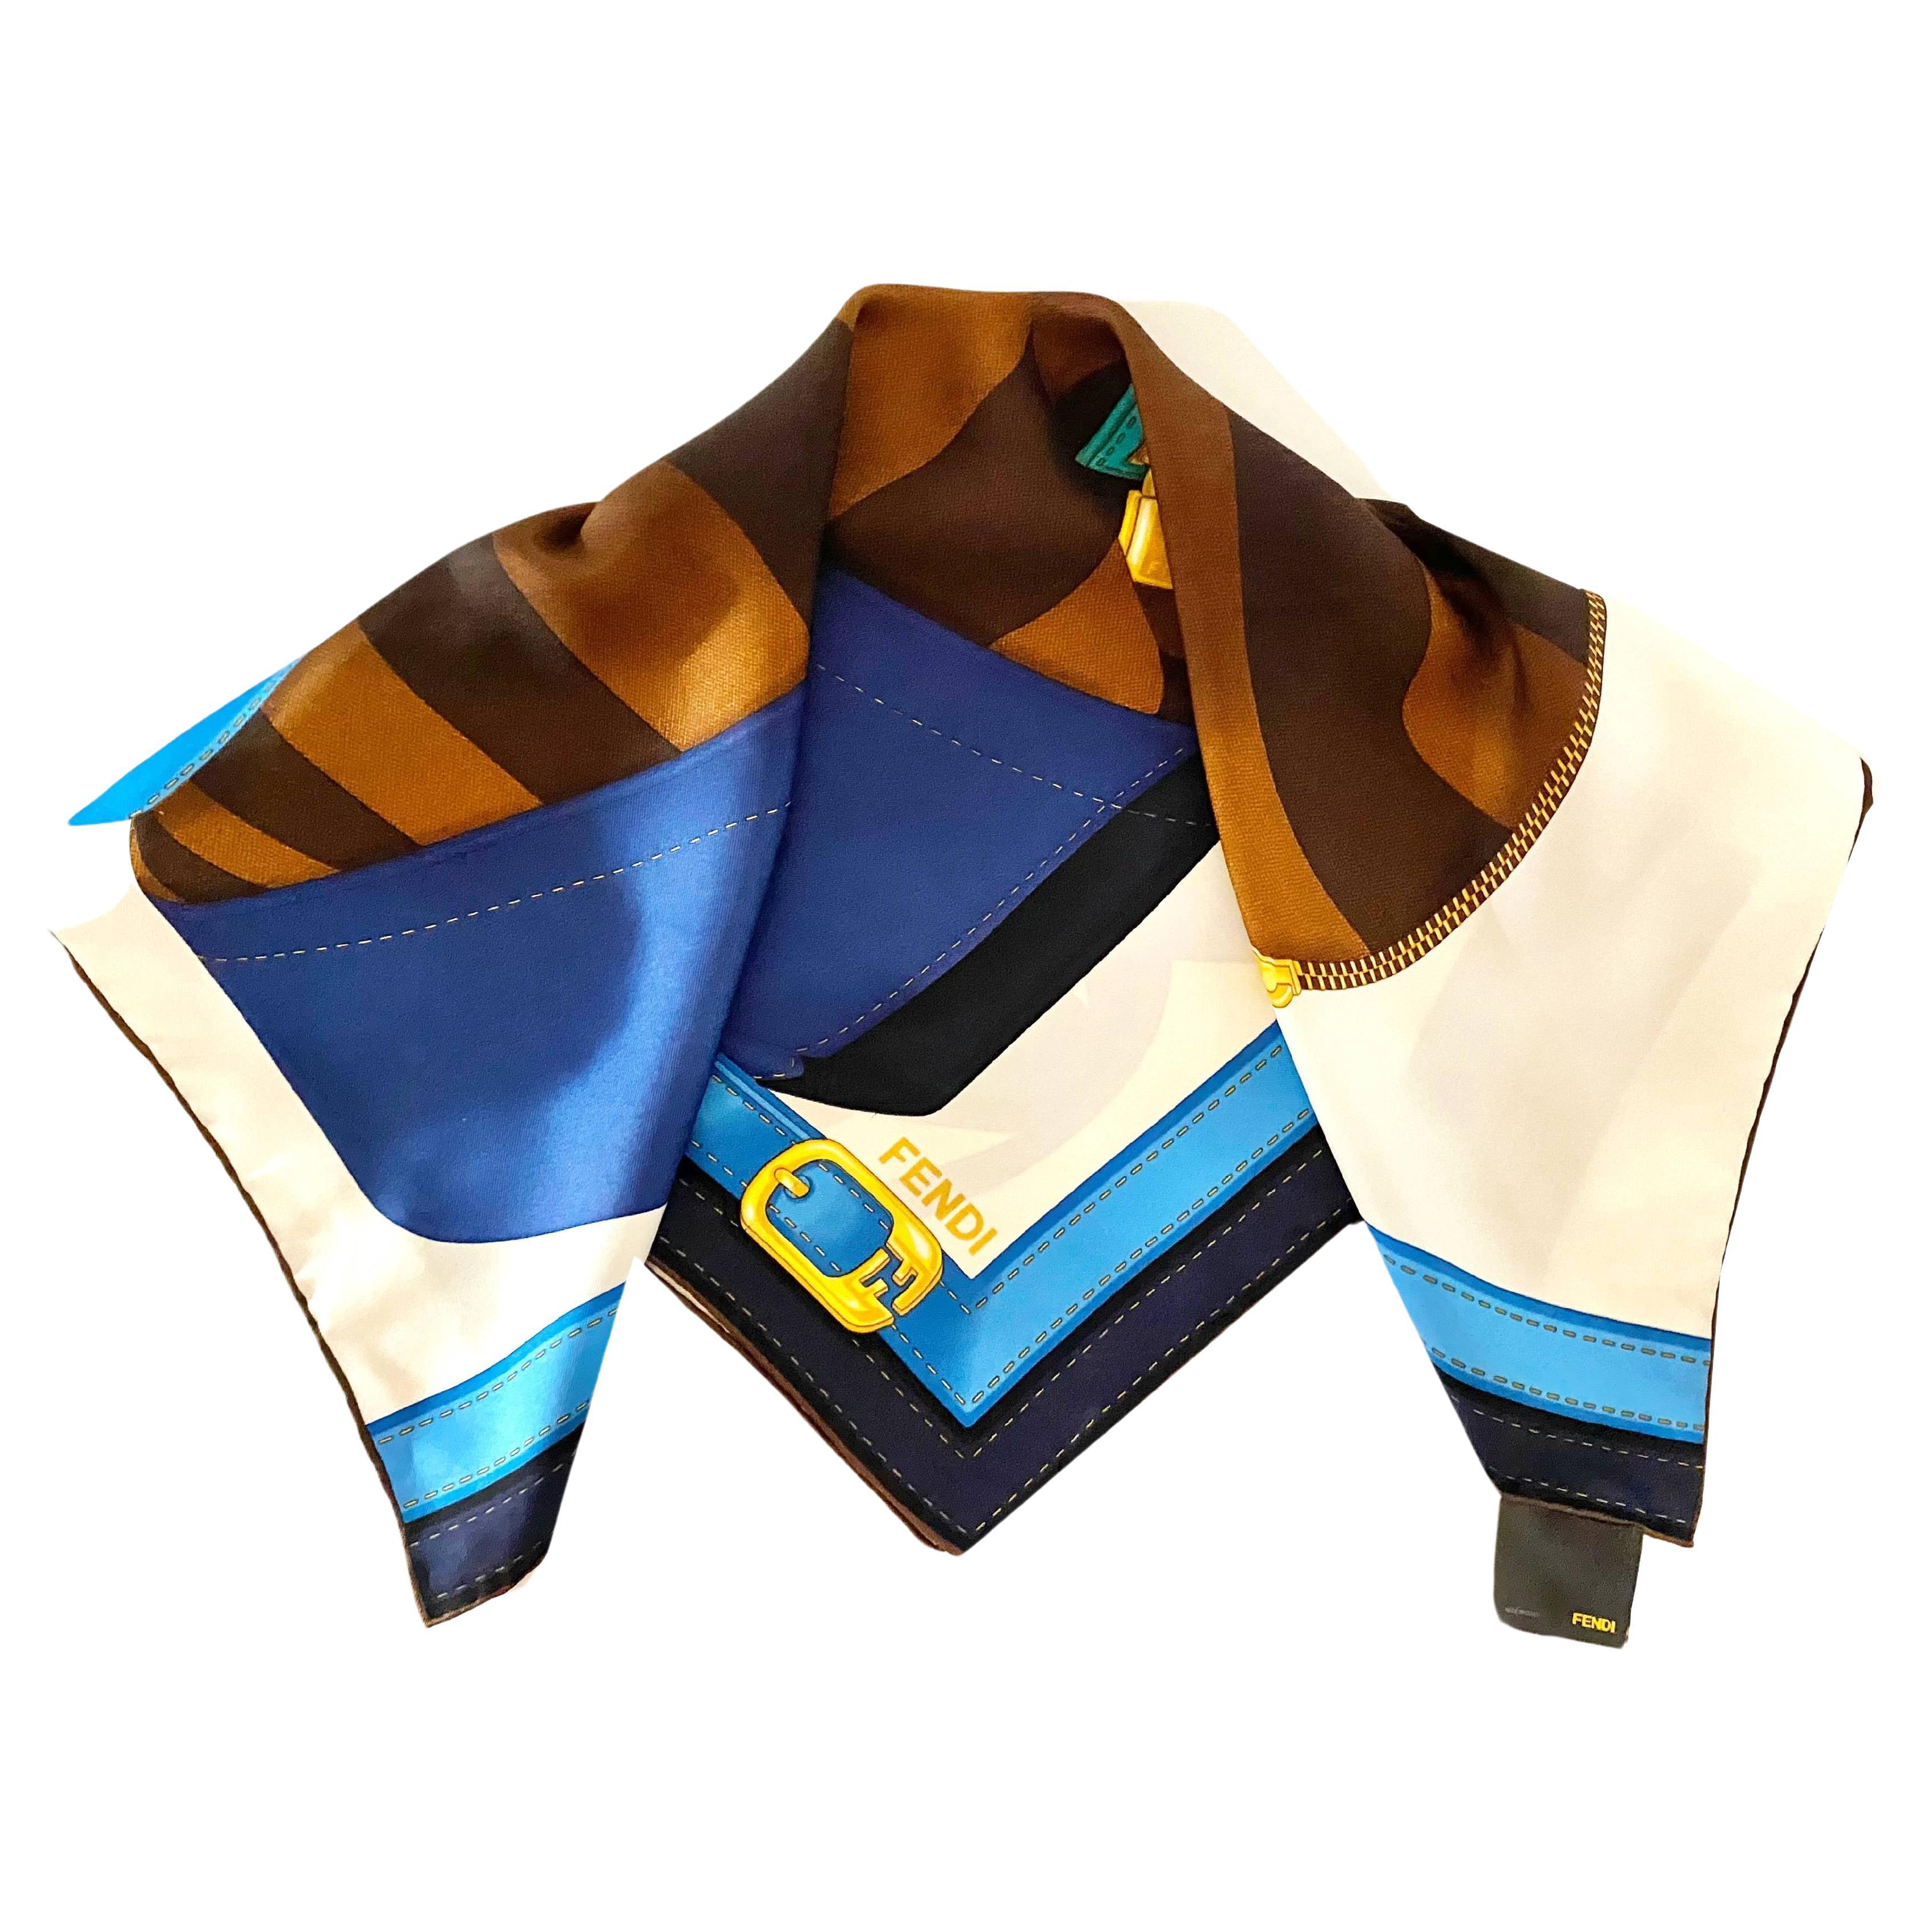 Elegant silk scarf by Fendi. The TWO BAGS Brown Blue and Black Silk Scarf has Blue  color and features an impressive Fendi bag in yellow, brown and gold color, 100% Silk , Made in Italy, Dry clean only

Condition: 2000s, vintage, very good

